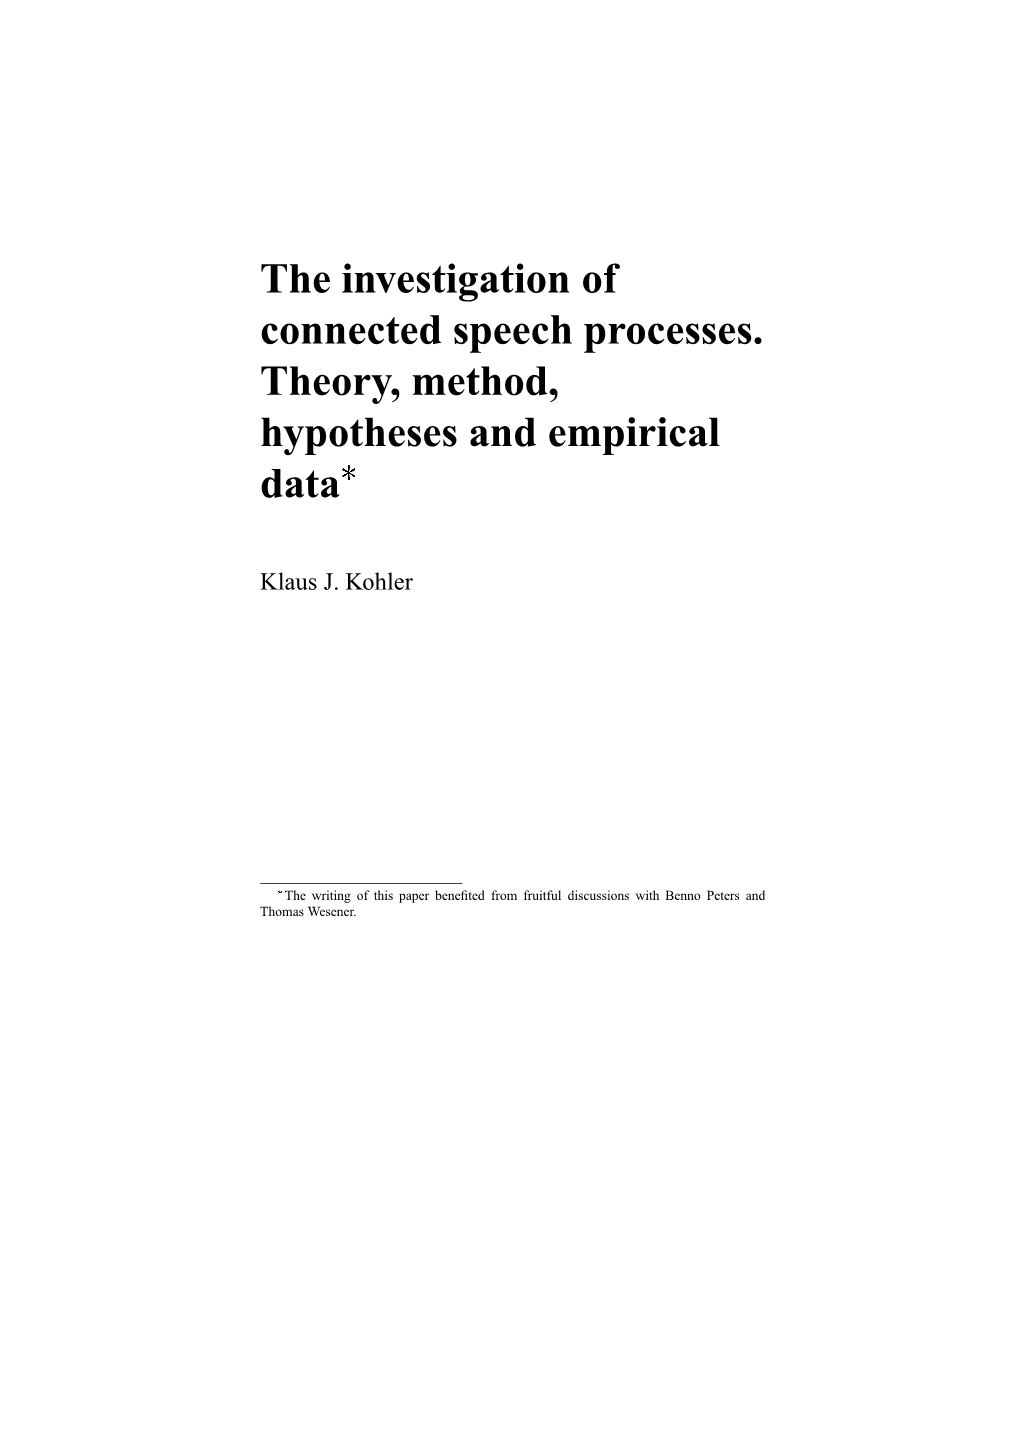 The Investigation of Connected Speech Processes. Theory, Method, Hypotheses and Empirical Data